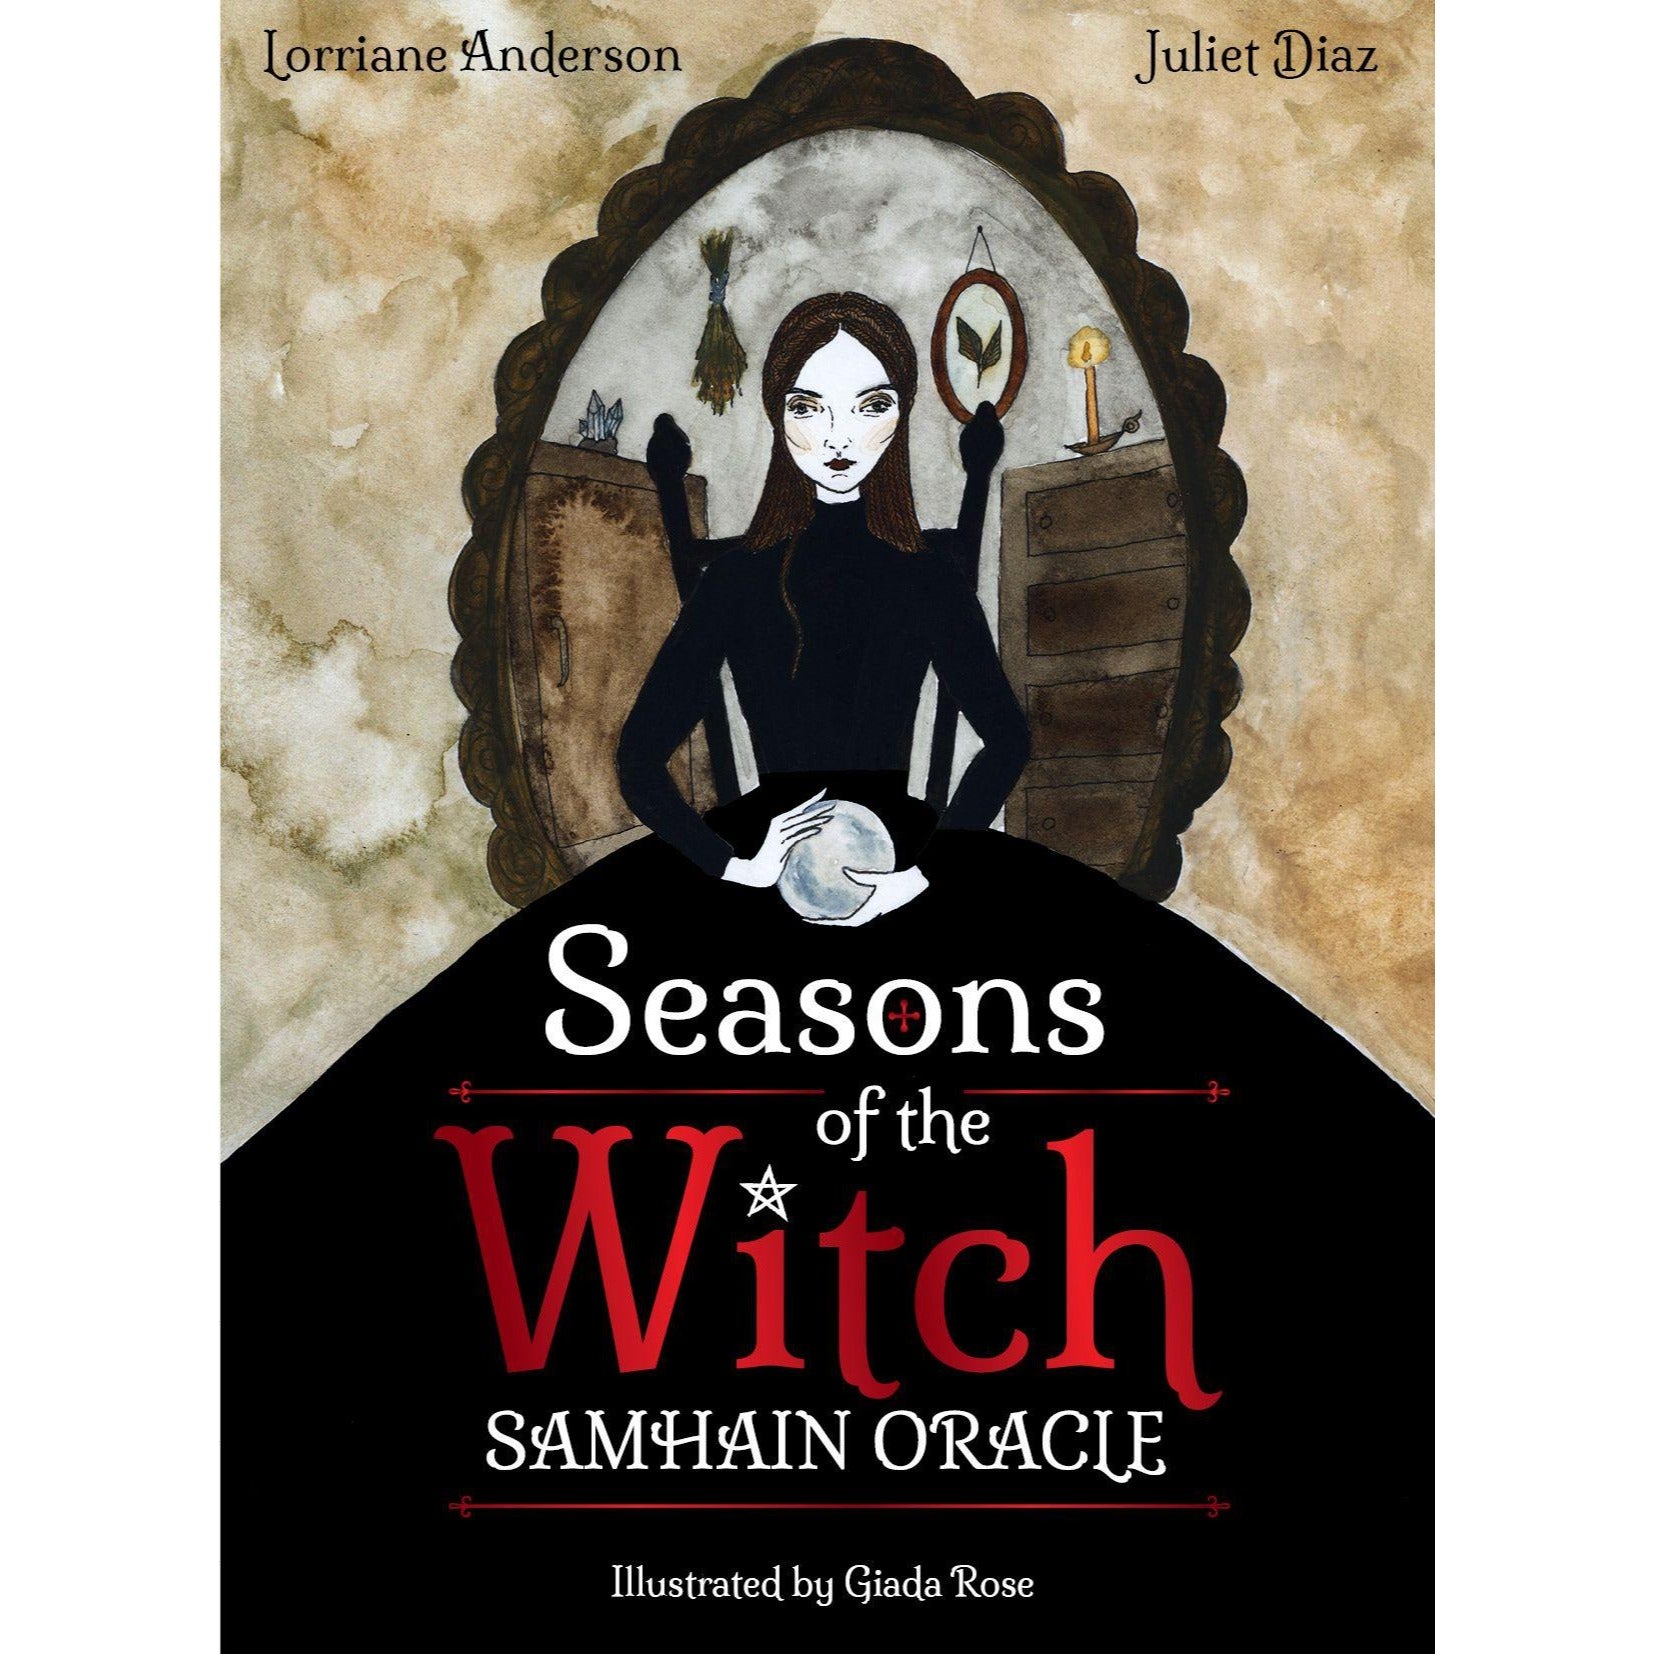 Seasons of the Witch